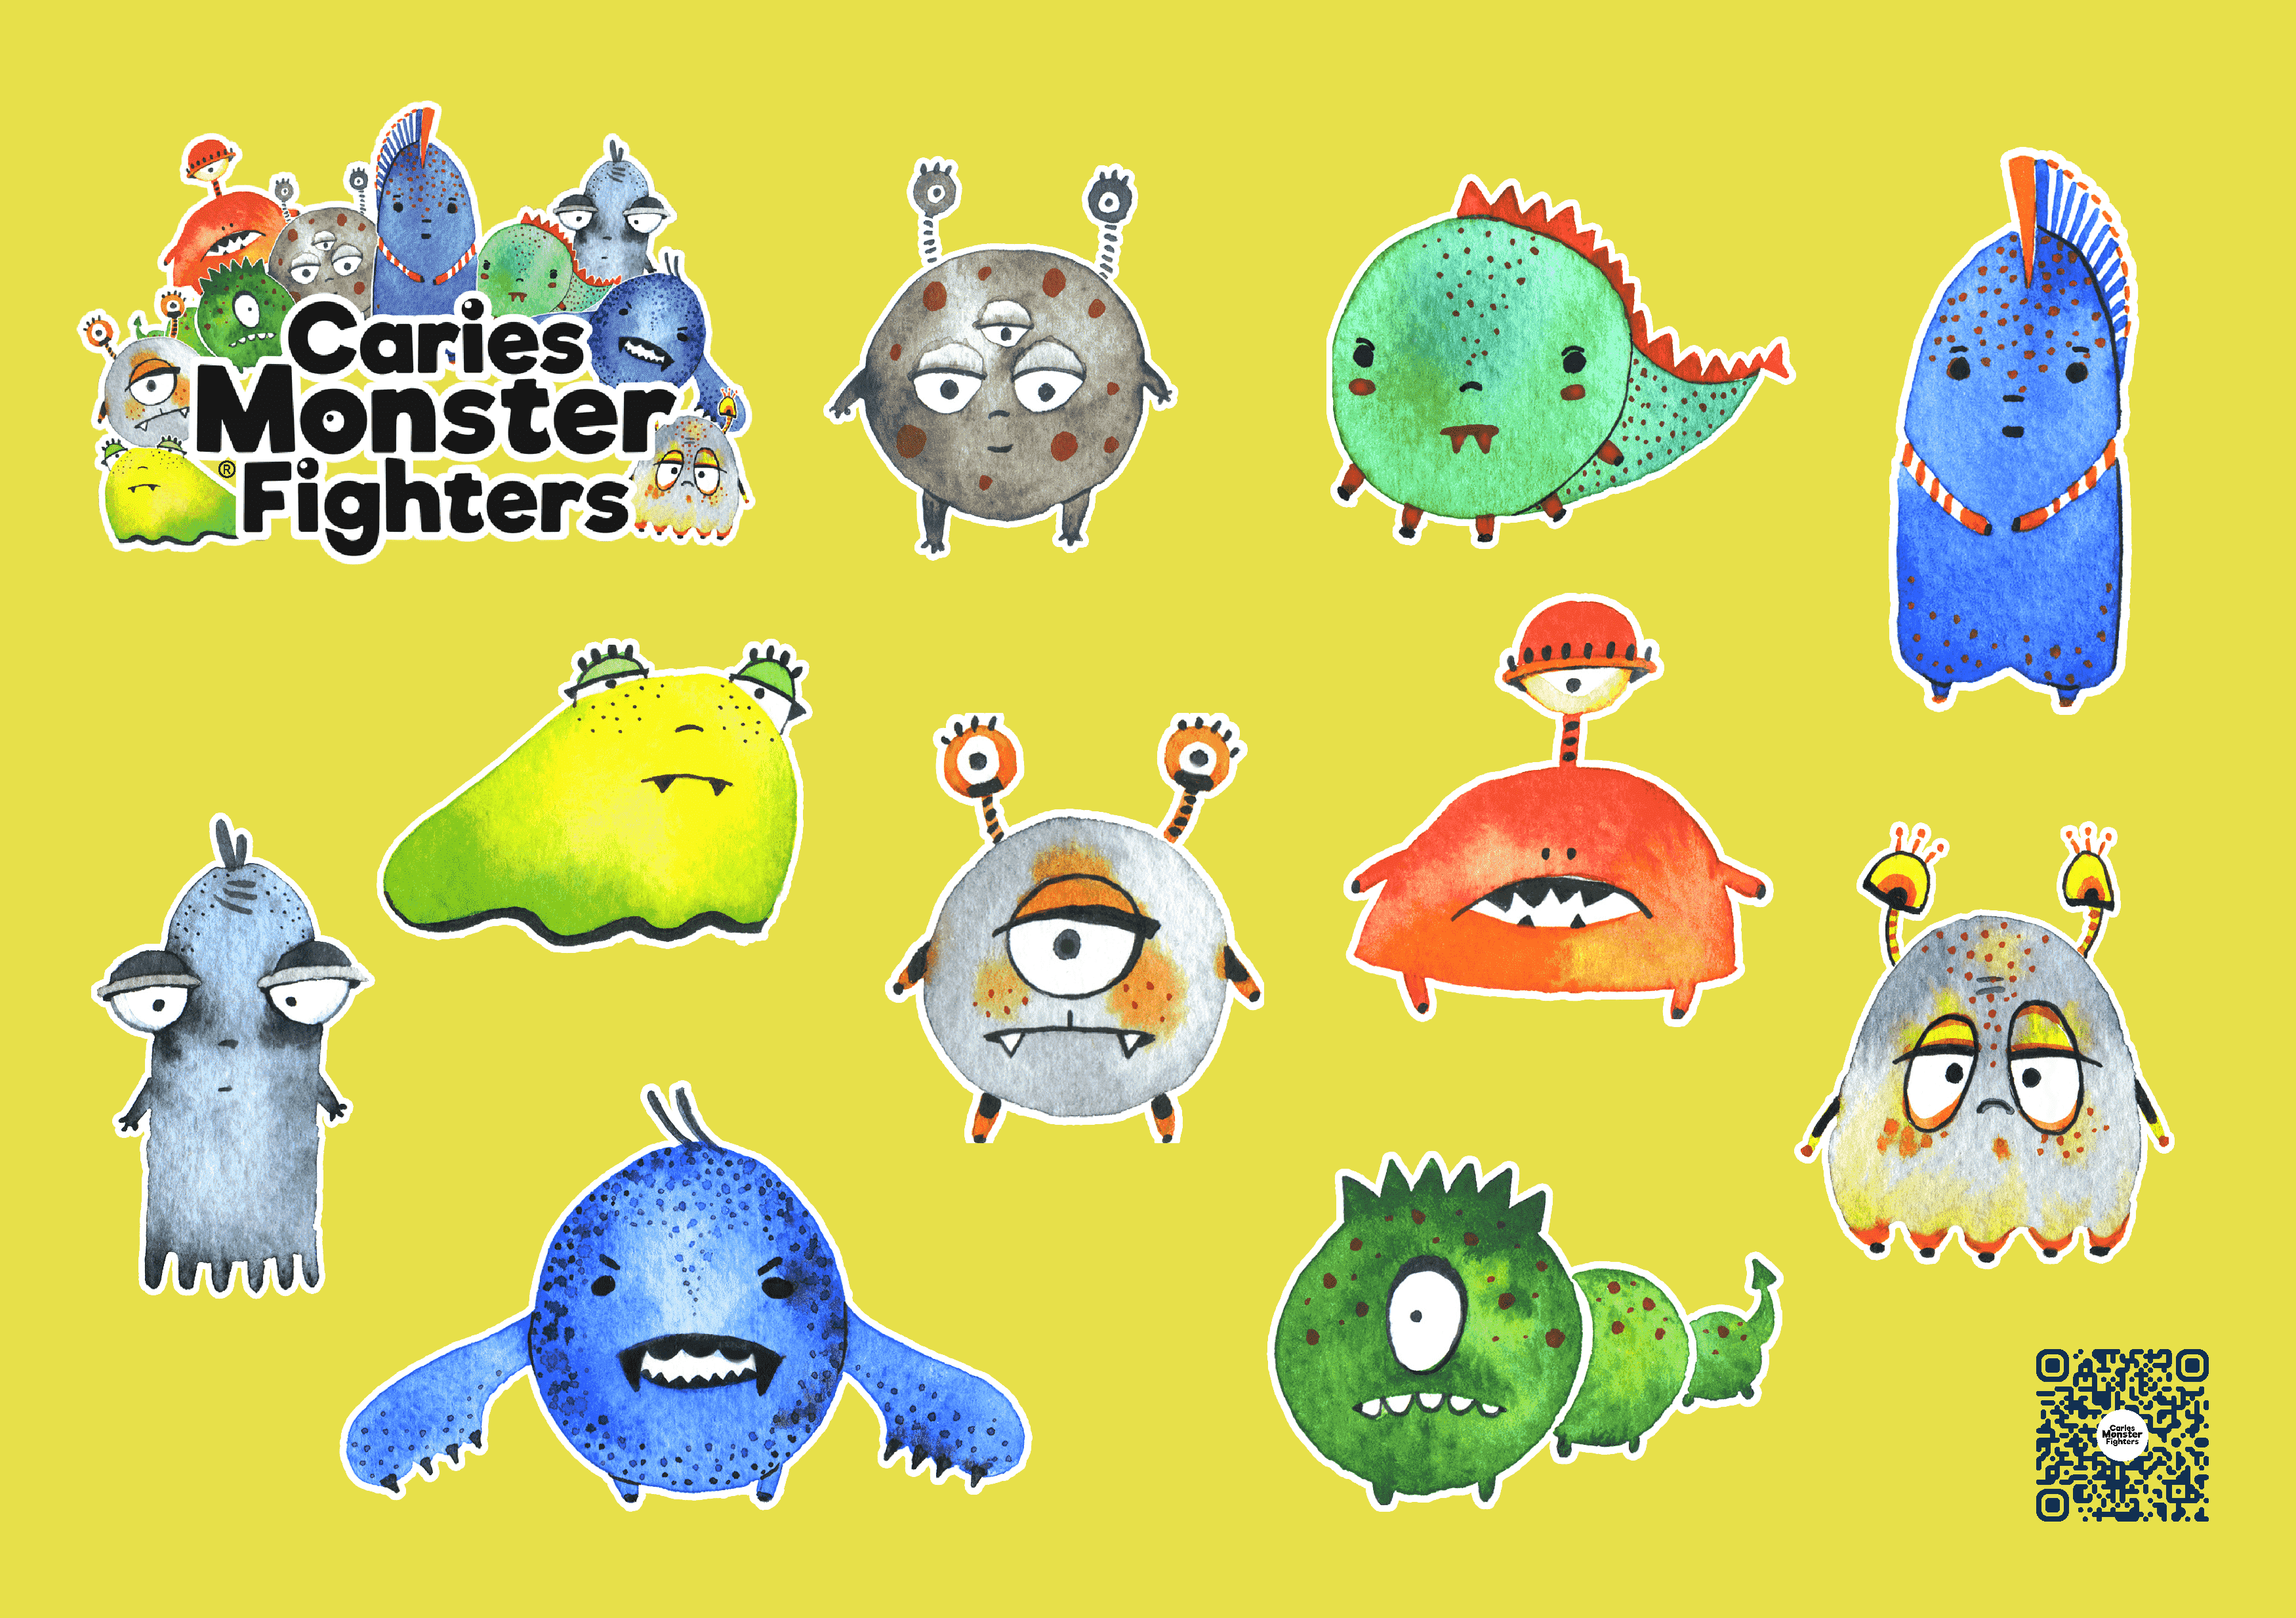 Sticker pack “Caries Monster Fighters”